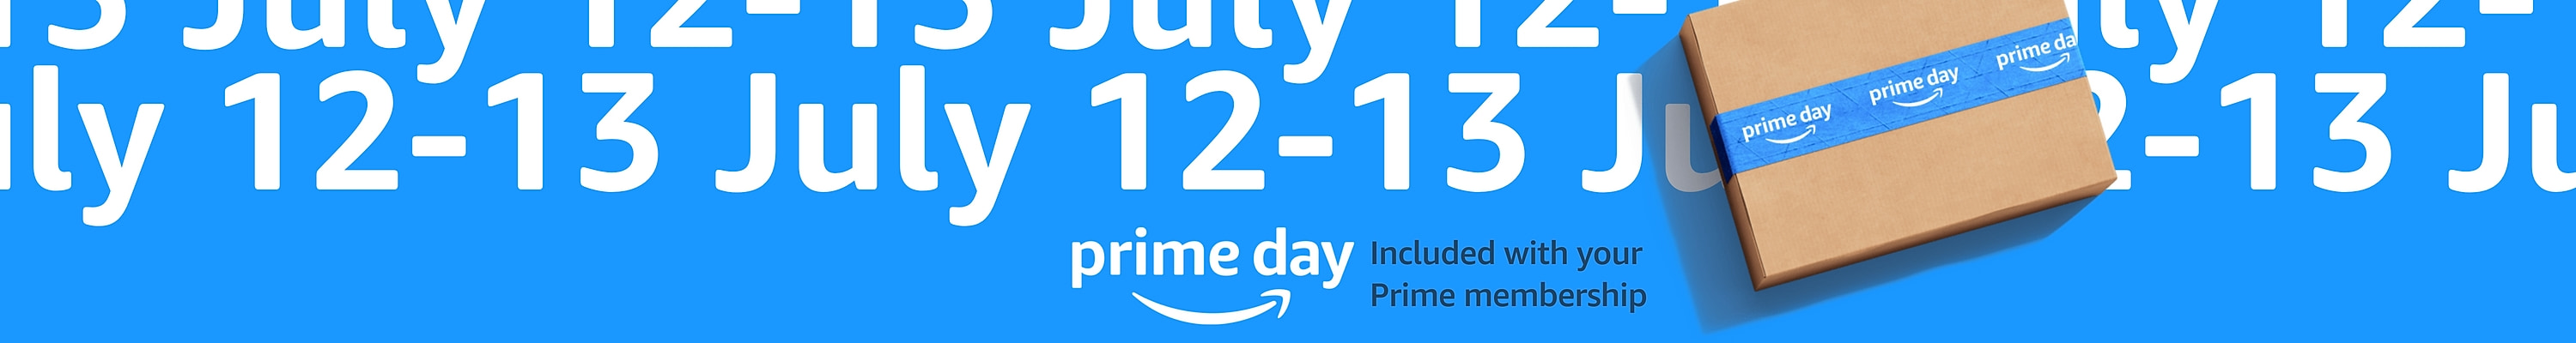 Amazon Prime Day 2022 Formally announced as Tuesday July 12 and Wednesday July 13th 2022